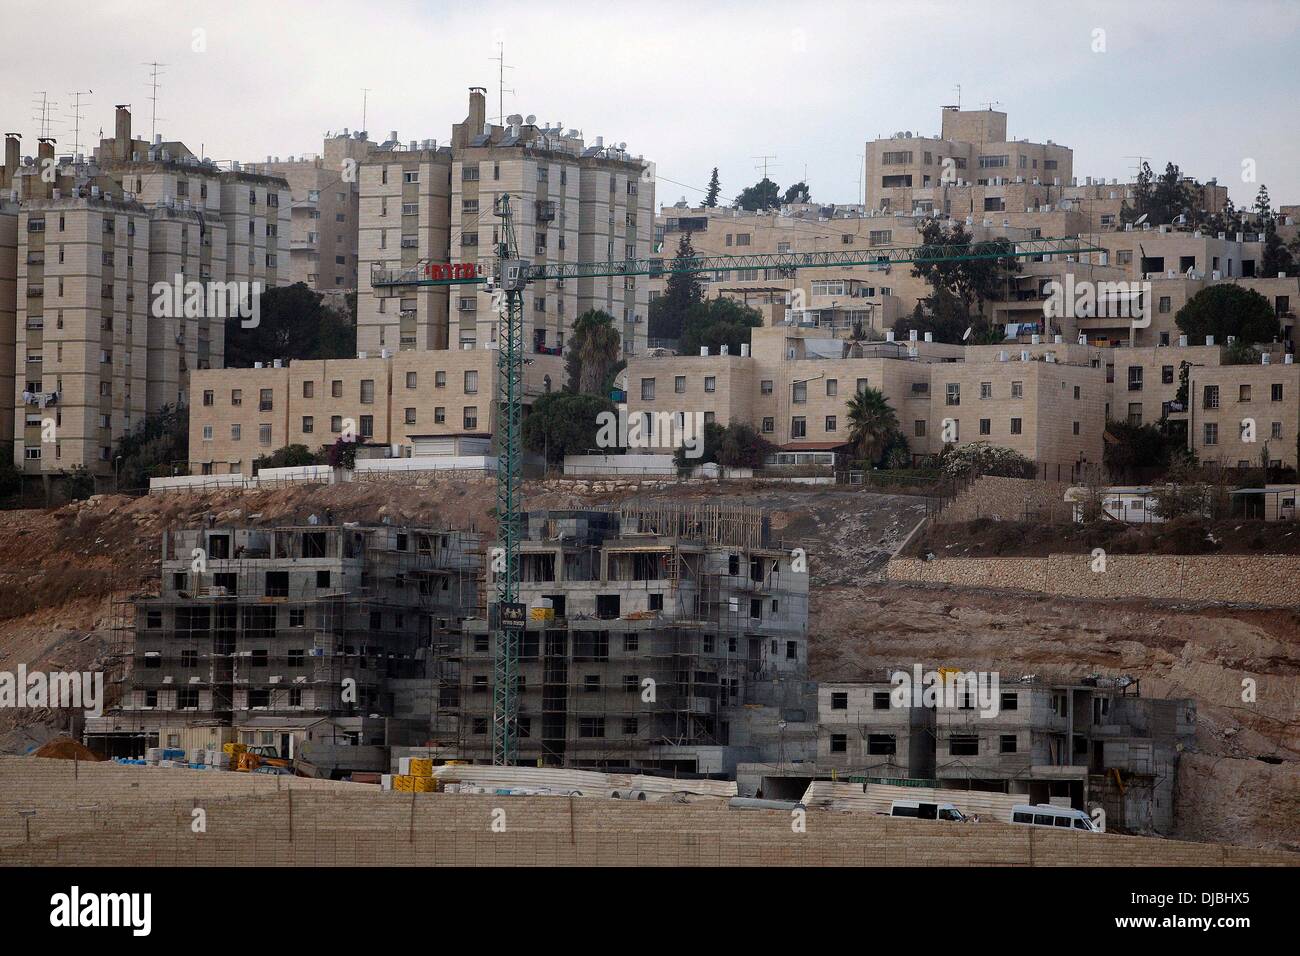 Jerusalem, North Jerusalem. 26th Nov, 2013. A construction site is seen in Pisgat Zeev, an urban settlement in an area Israel annexed to Jerusalem after the 1967 Middle East war, near the Arab village of Beit Hanina, North Jerusalem, on Nov. 25, 2013. The Civil Administration, the Israeli body governing the occupied West Bank territories, approved on Nov. 24 the construction of 799 new housing units in West Bank settlements, the Ha'aretz daily reported. © Muammar Awad/Xinhua/Alamy Live News Stock Photo